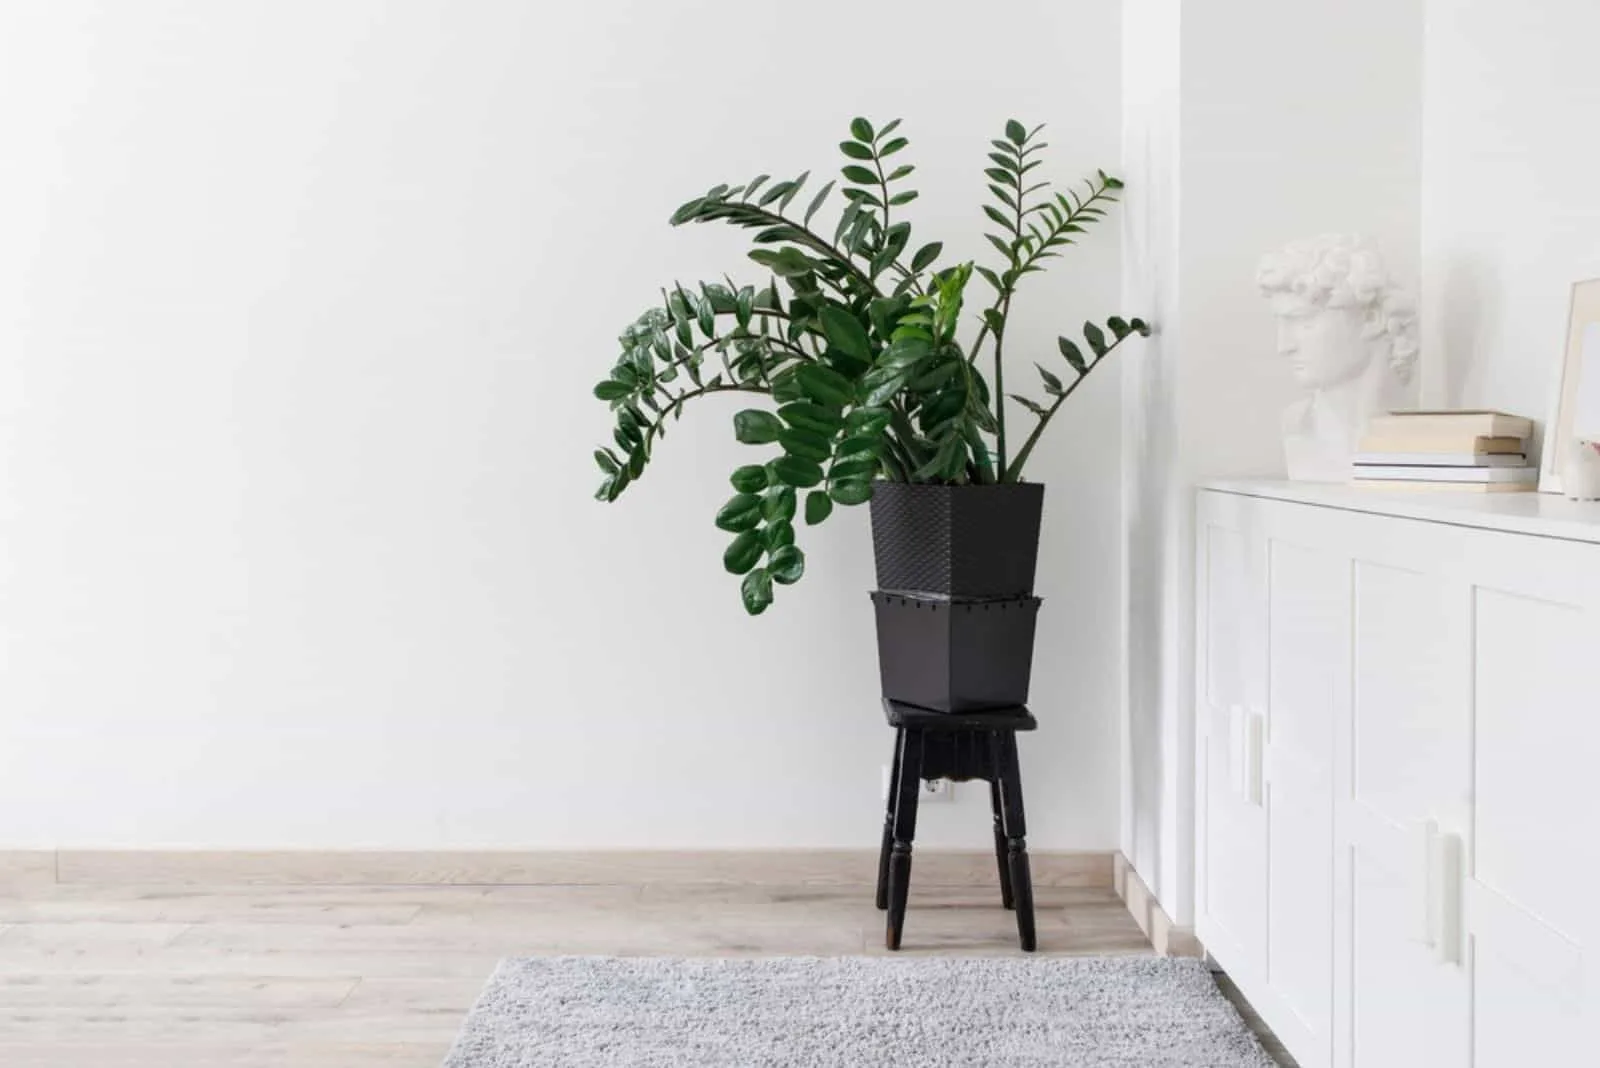 Zamioculcas plant in the clay pot on black stool